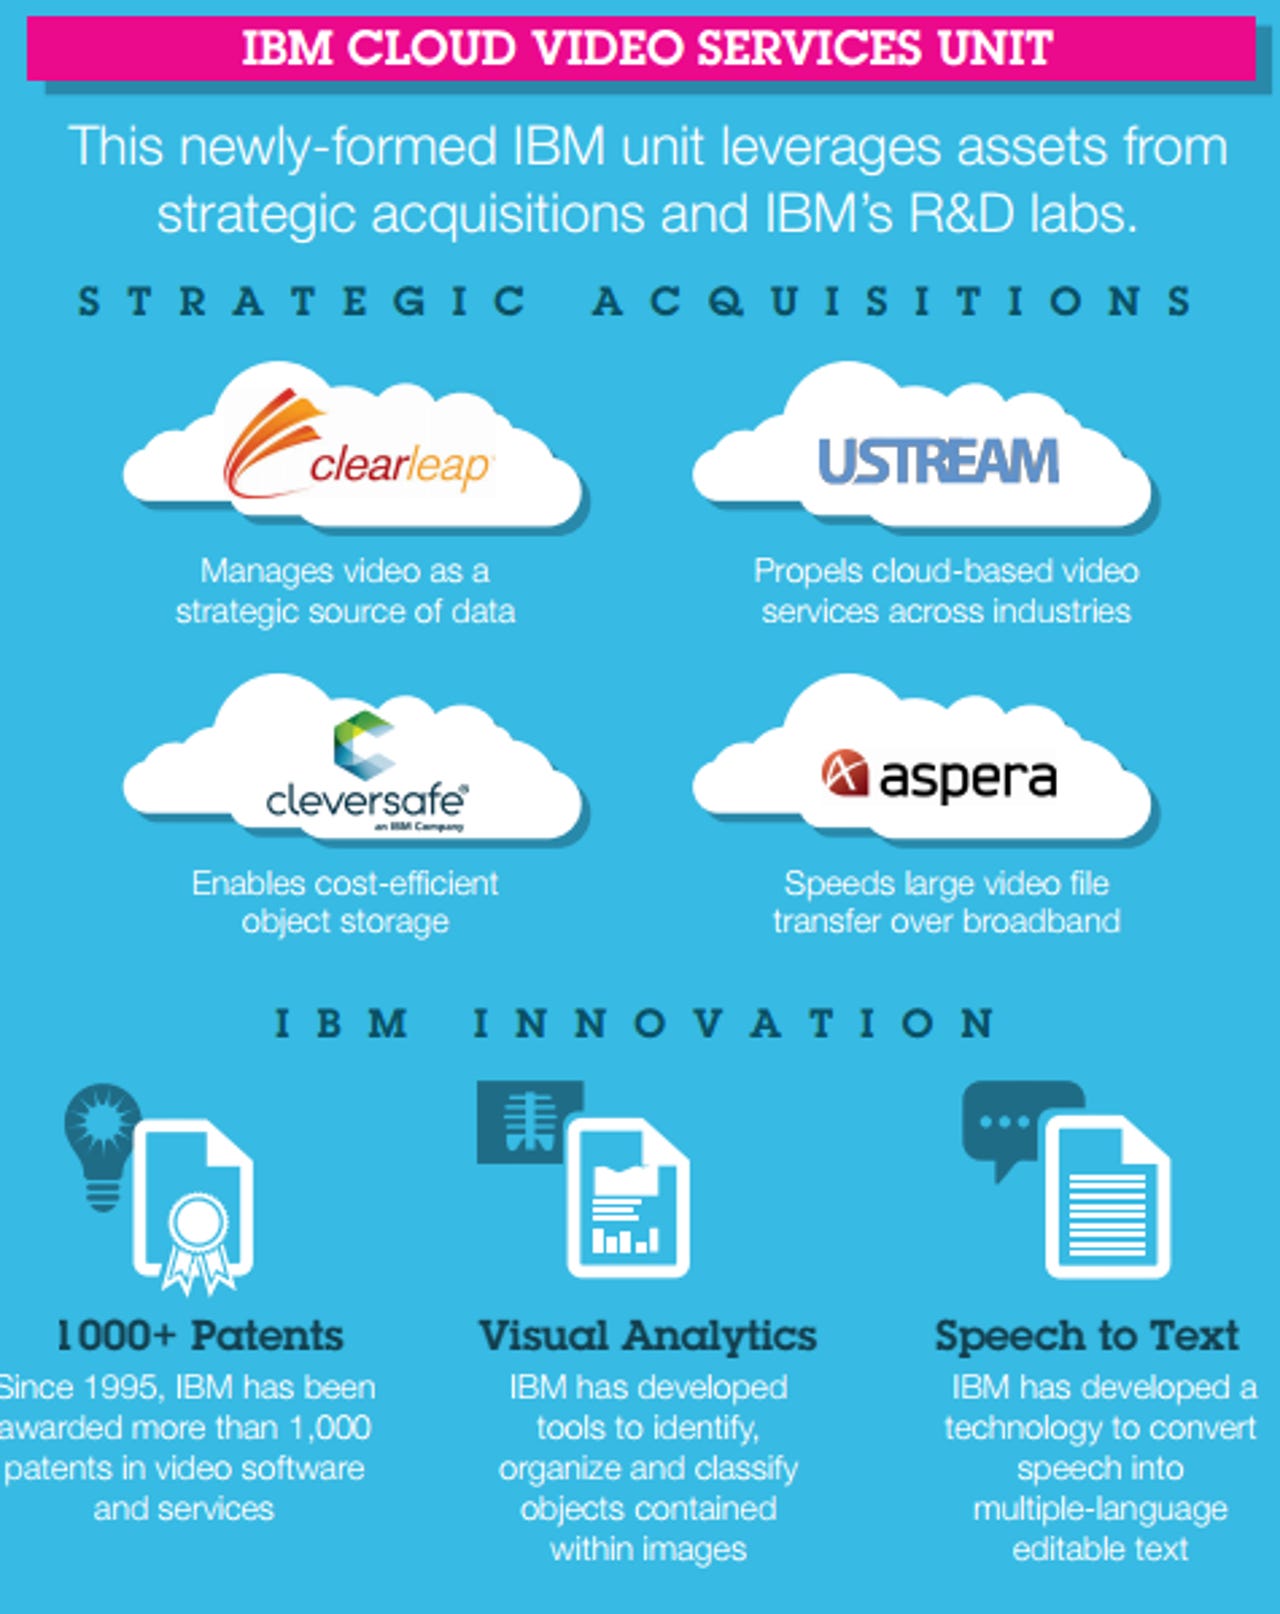 ibm-ustream-purchase-leads-to-cloud-video-services-unit.png